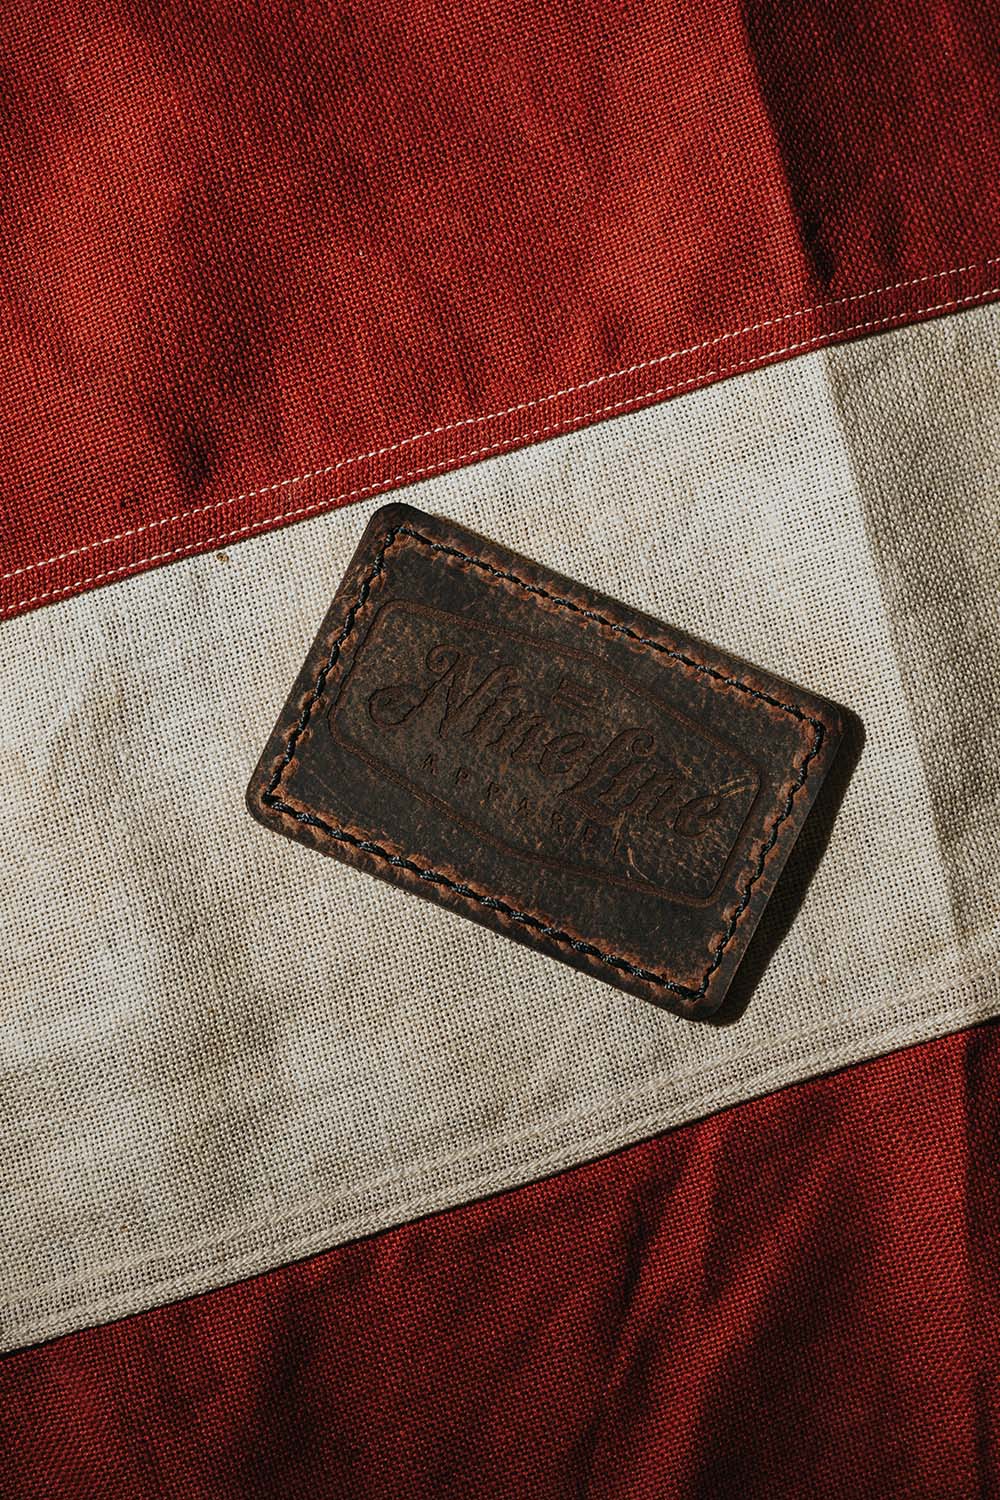 American Made Leather Patches - Nine Line Apparel